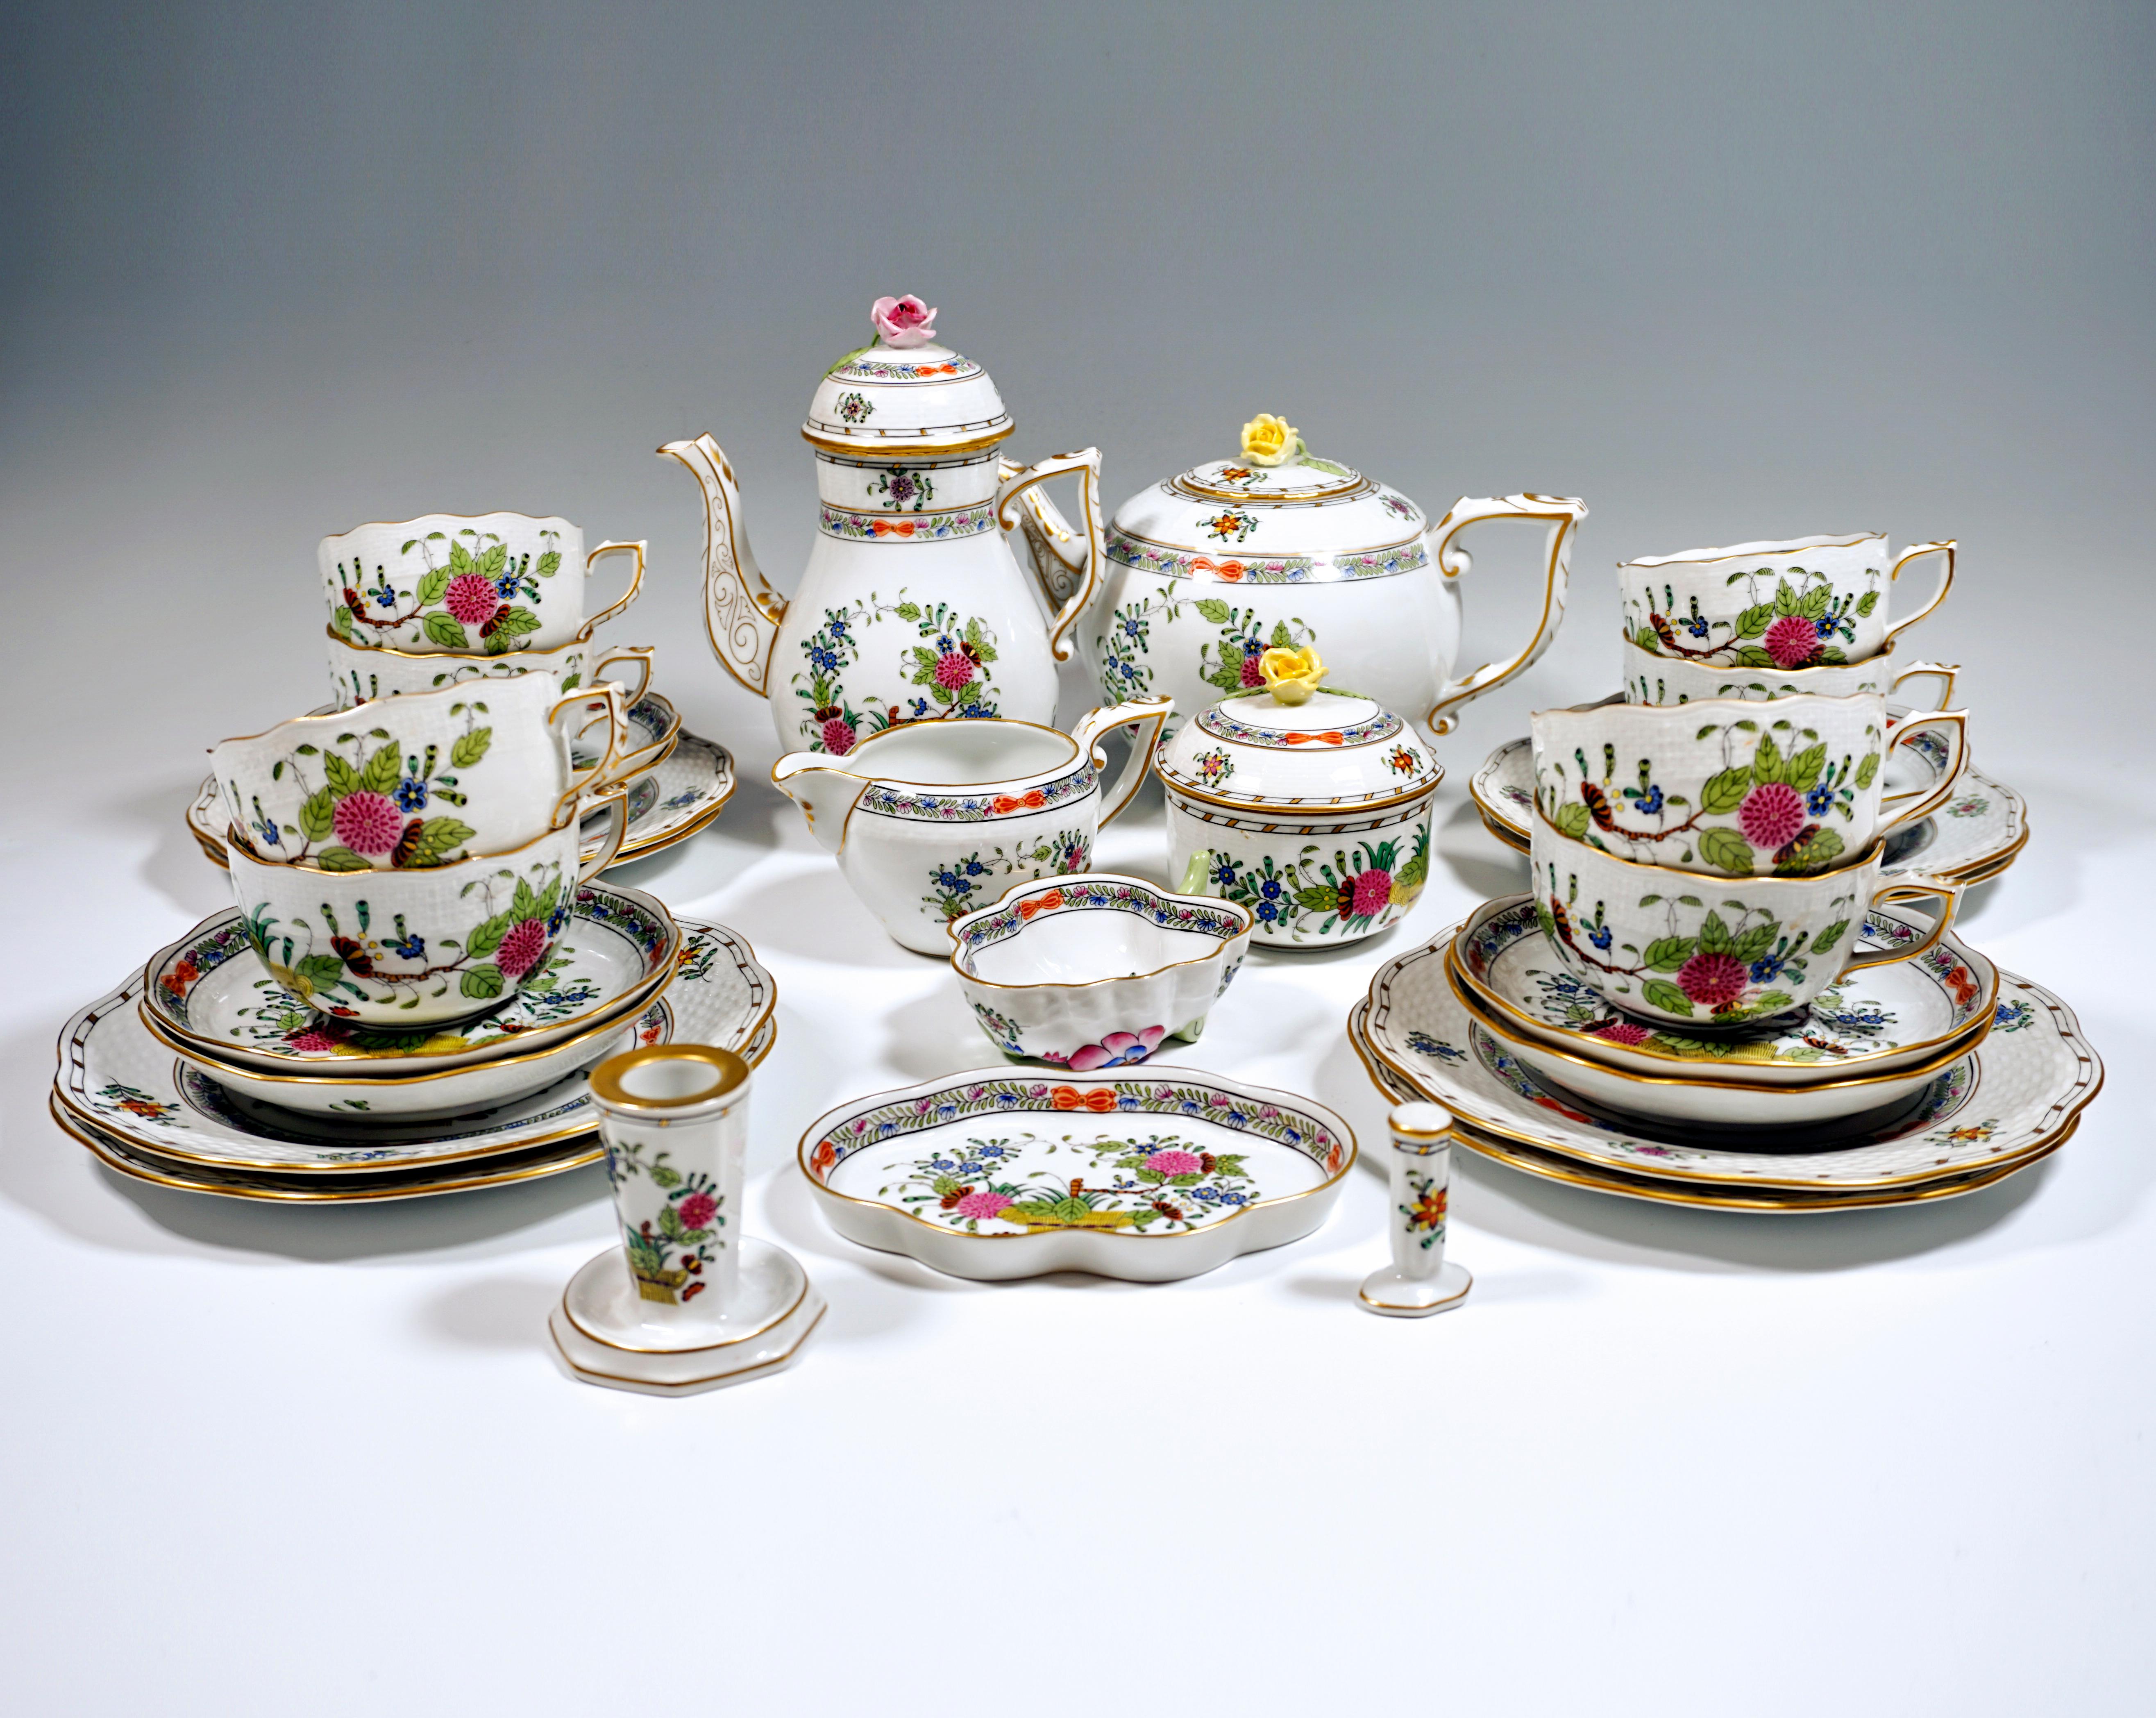 Herend service consisting of 32 parts: coffee pot with lid, teapot with lid, milk jug, sugar bowl, eight cups, eight saucers, eight dessert plates, a candle holder, a candy bowl, an ashtray and a cigarette steamer.
Shape: Osier / basket